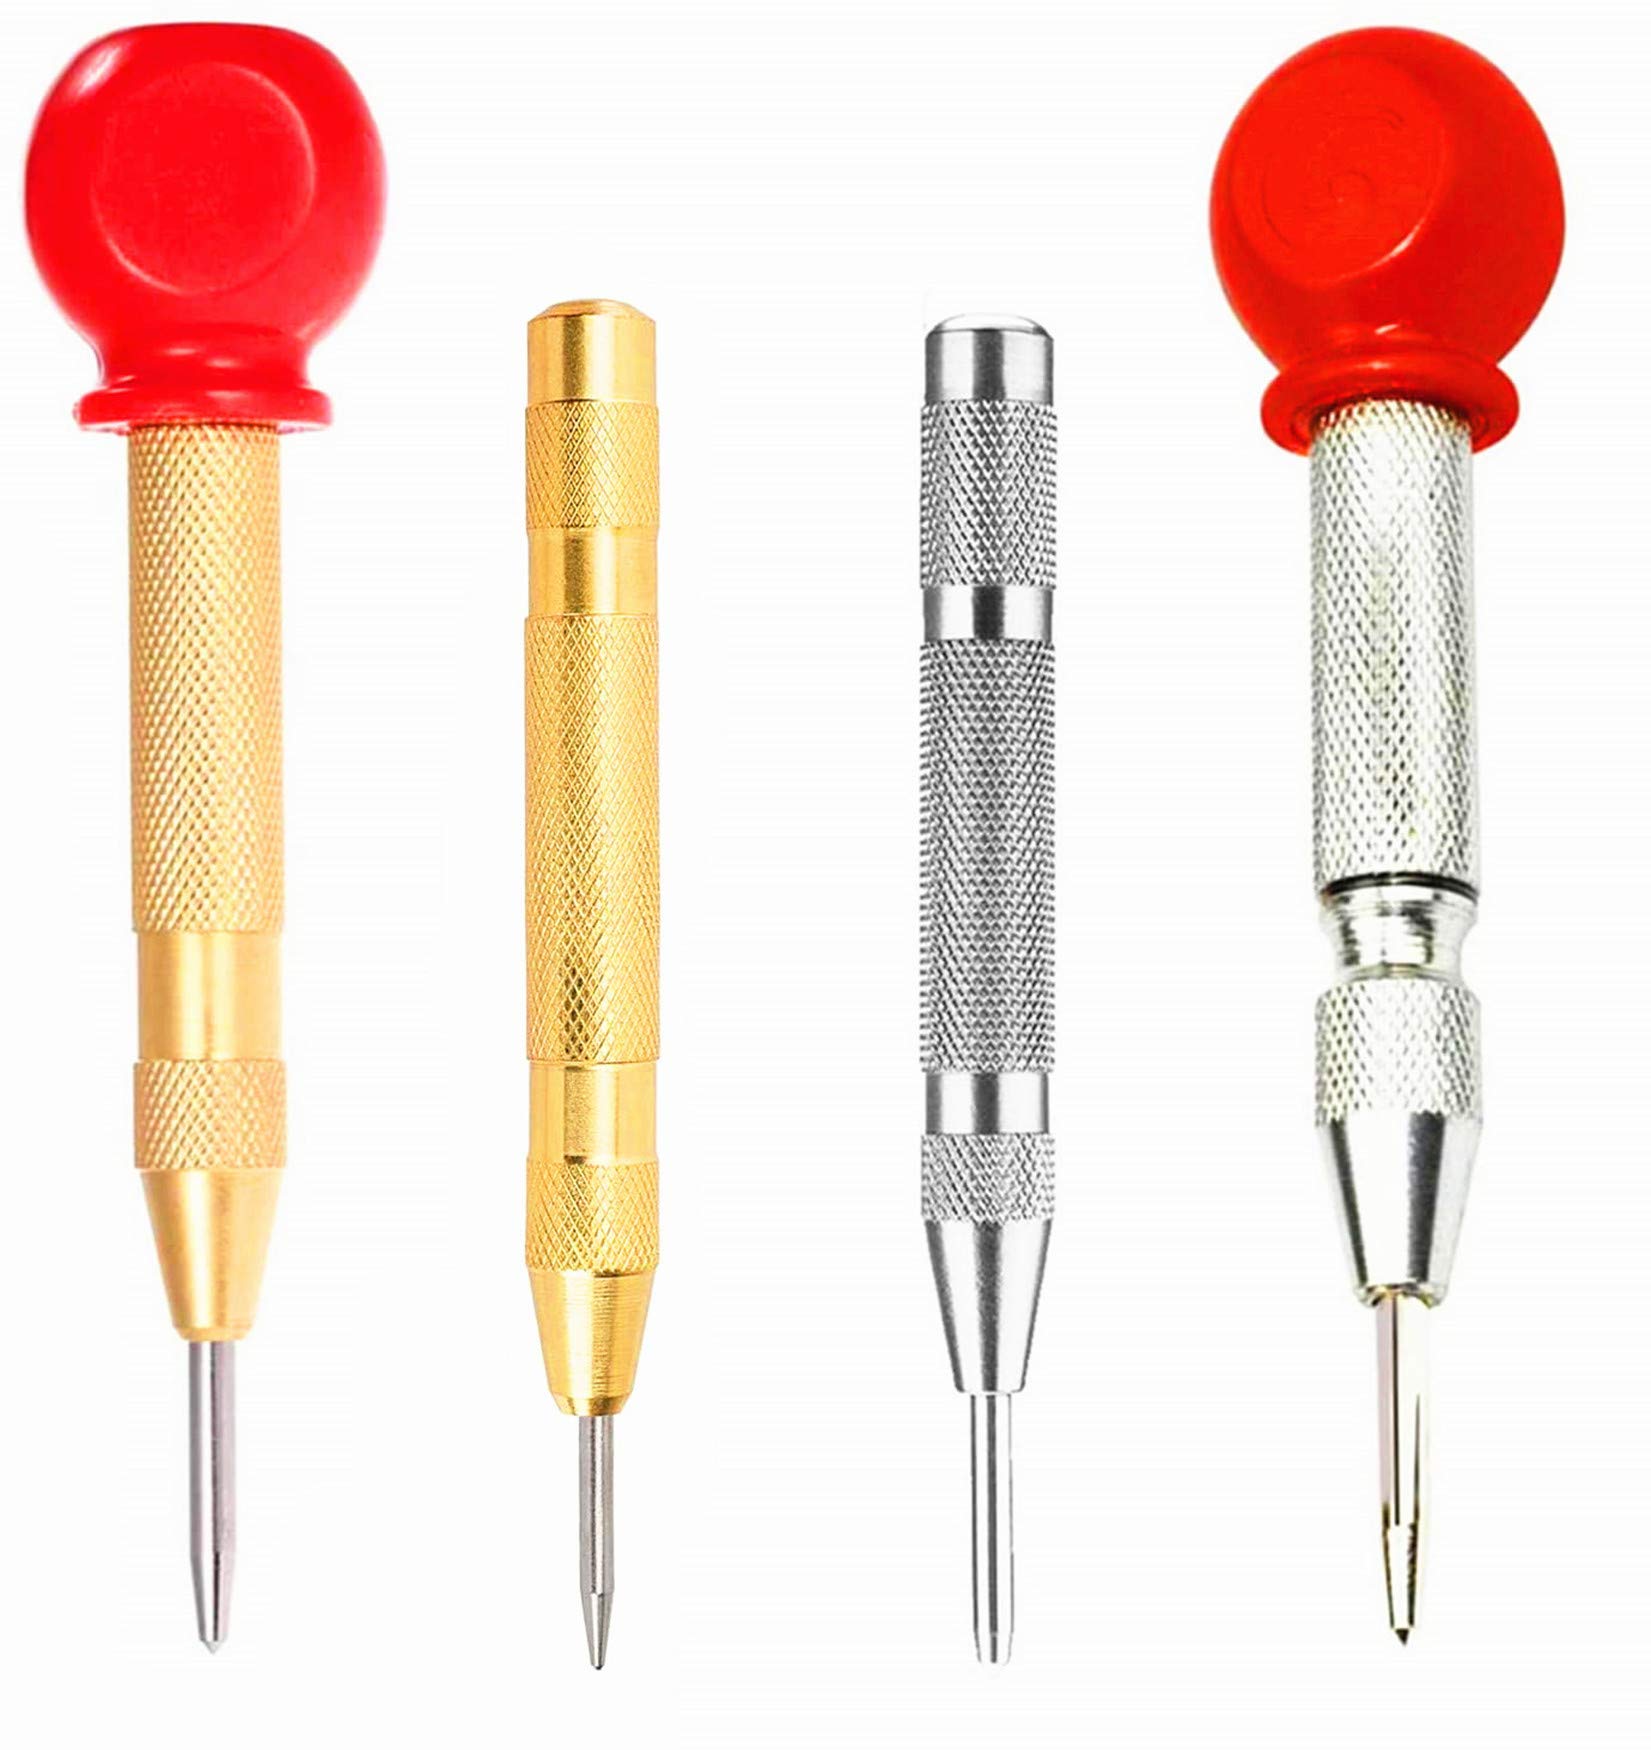 Sweetfamily 4 Pack Automatic Center Punch,5 Inch Brass Spring Loaded Center Hole Punch With Adjustable Tension, Awl Puncher With Cushion Cap